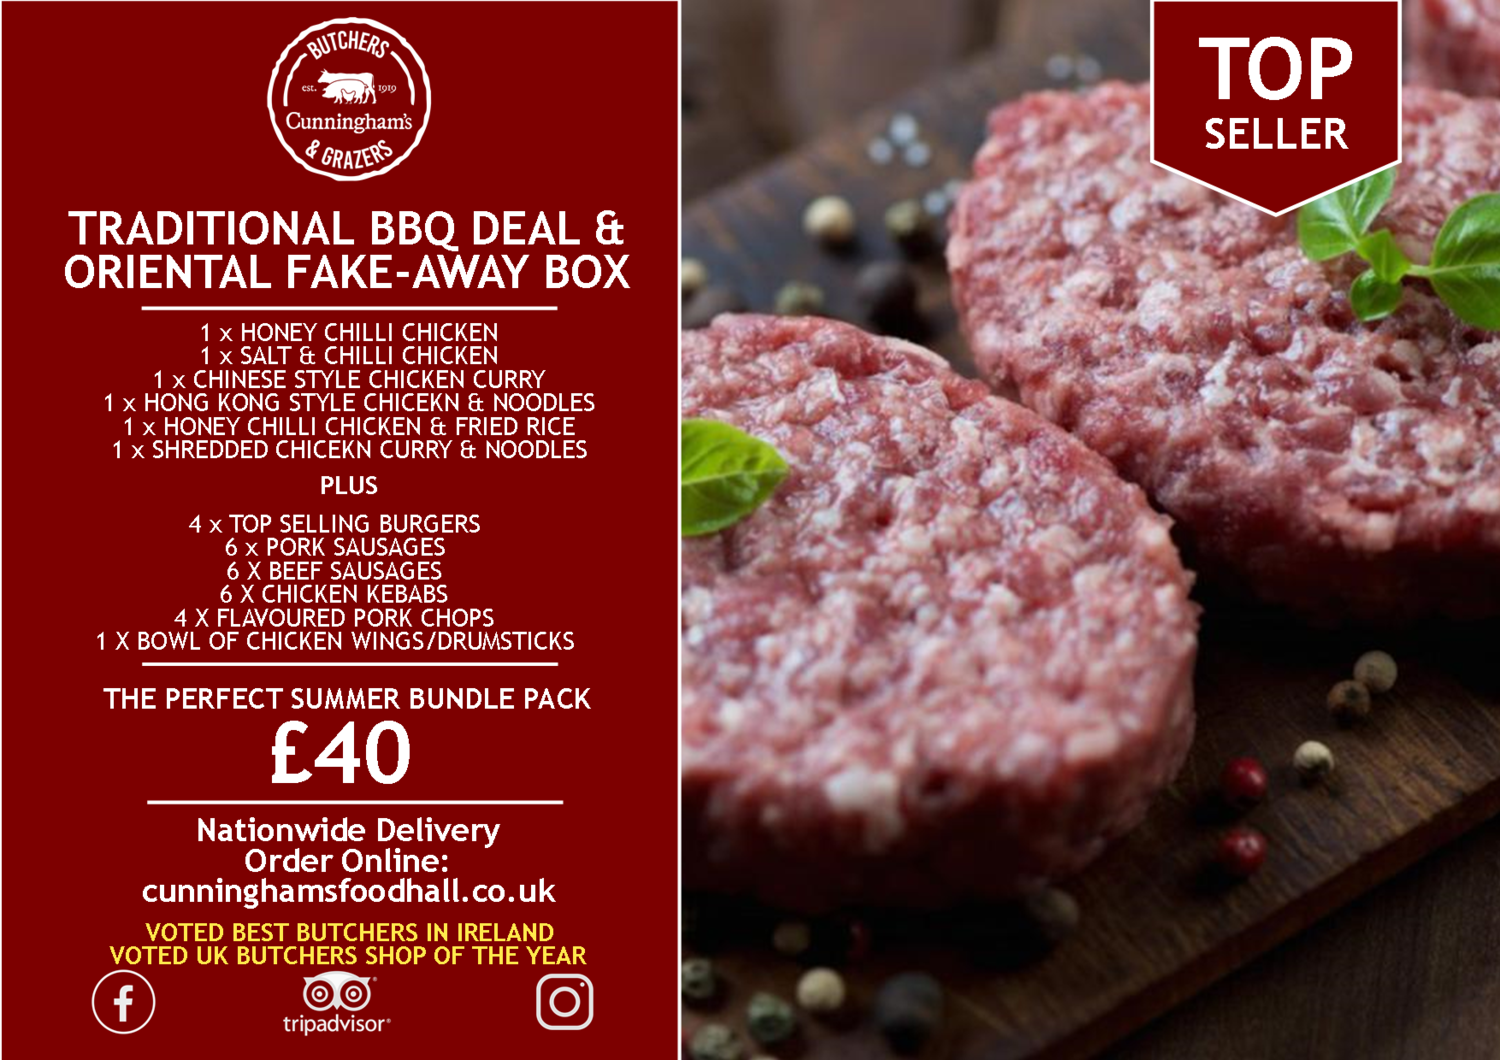 TRADITIONAL BBQ DEAL & ORIENTAL FAKE-AWAY BOX